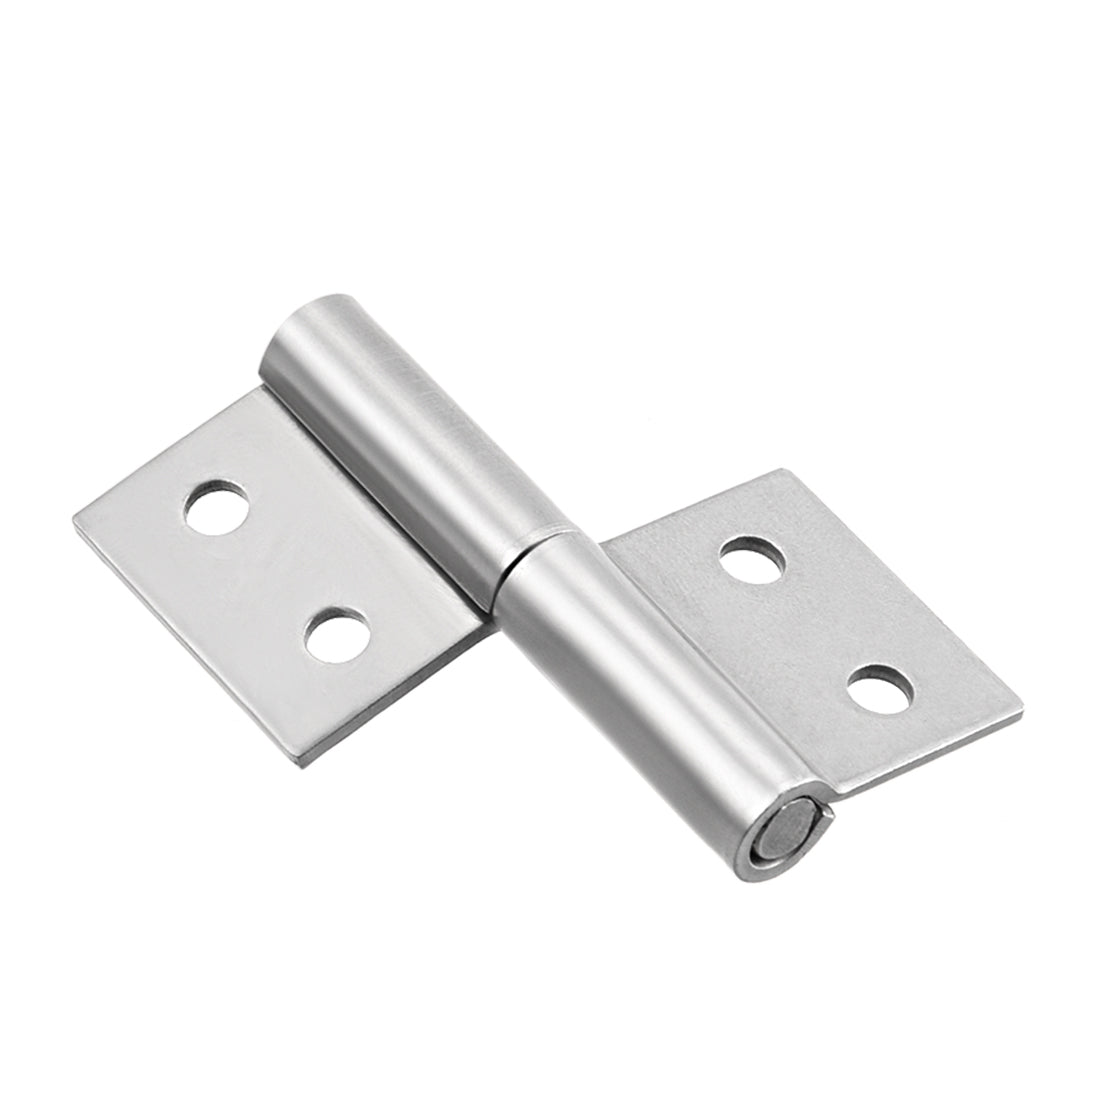 uxcell Uxcell 2-inch Long Steel Small Slip Joint Flag Hinge - Lift Off Right Handed Lid Door